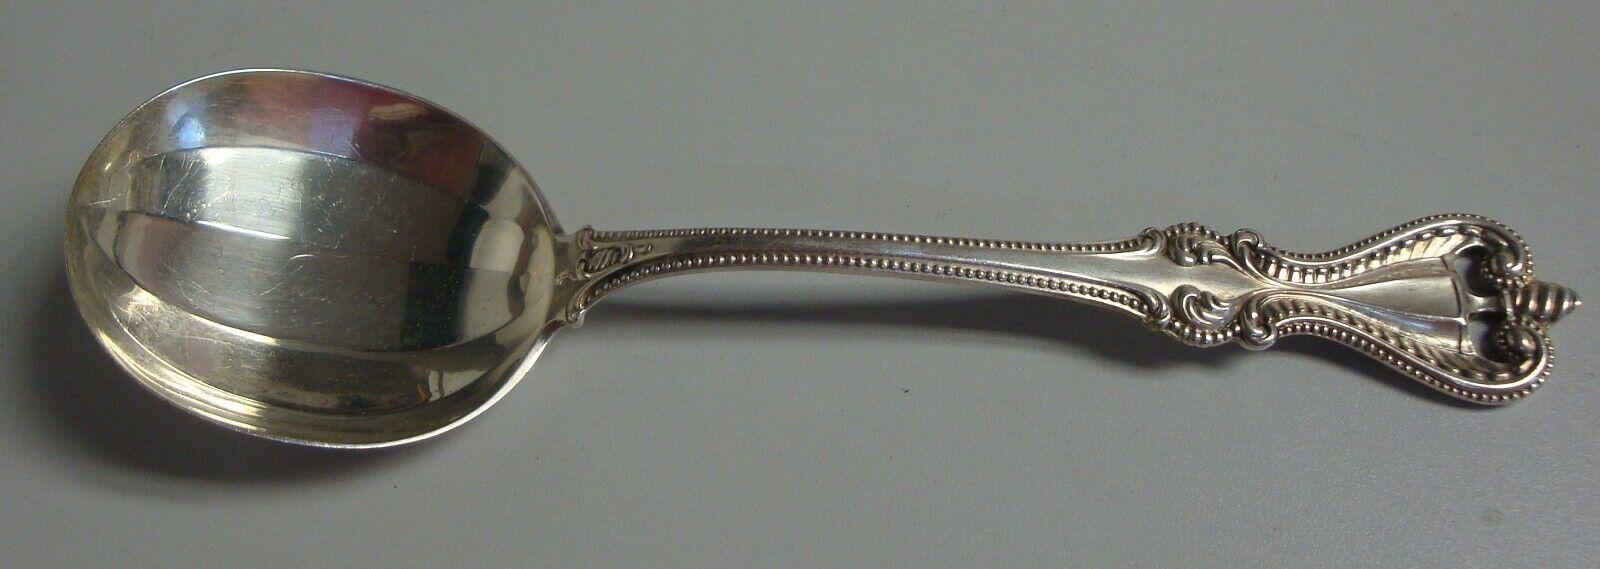 Towle Old Colonial (1895) Gumbo Spoon, 6-7/8"    S Monogram On Back